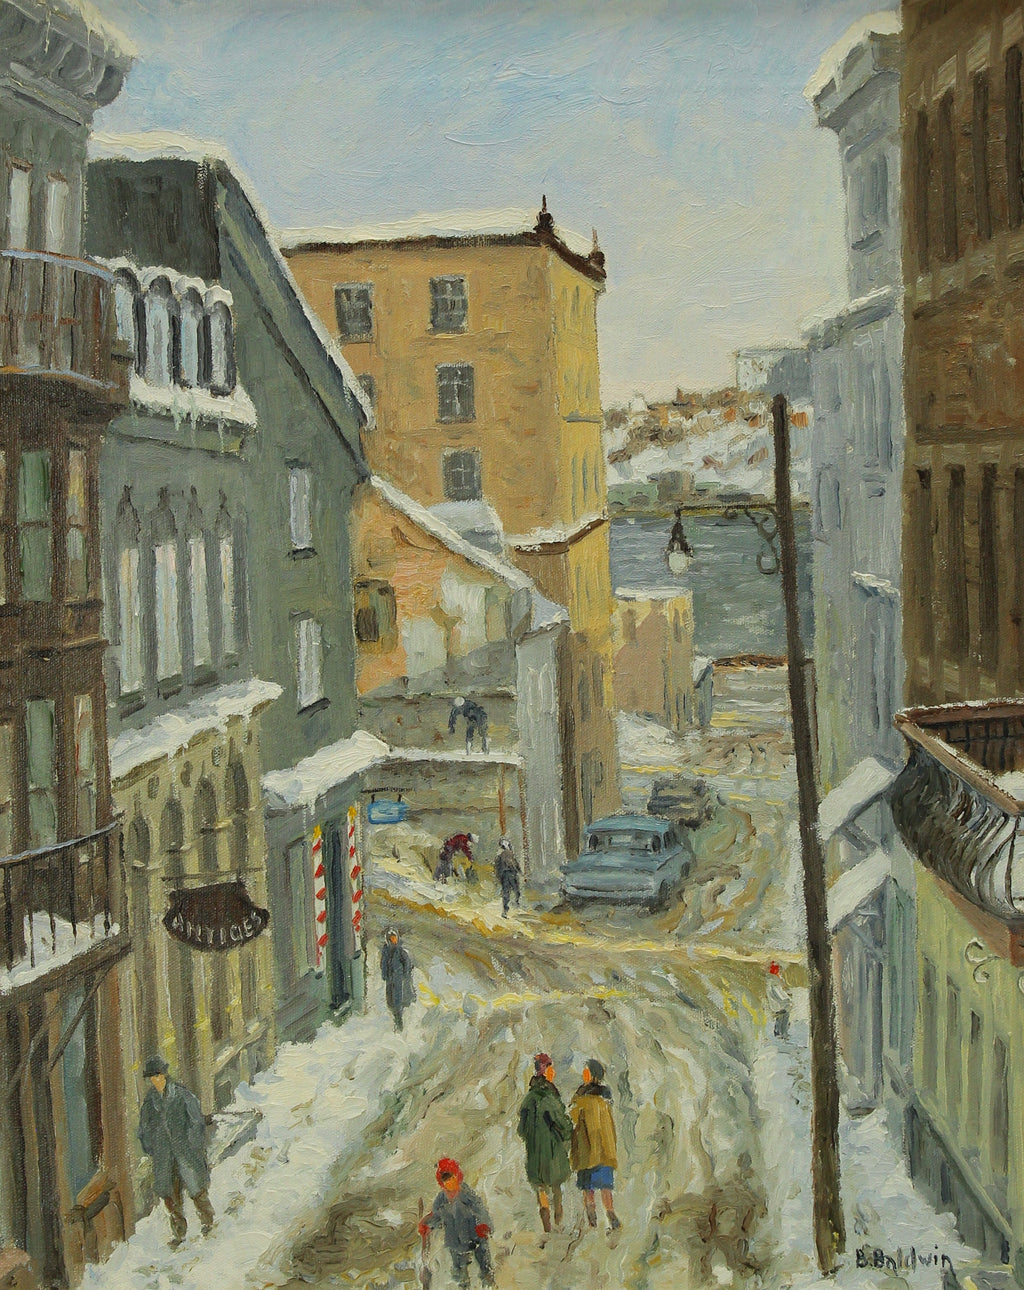 Betty Baldwin painting, Rue sous le fort, Quebec - Oil on Canvas 20x16